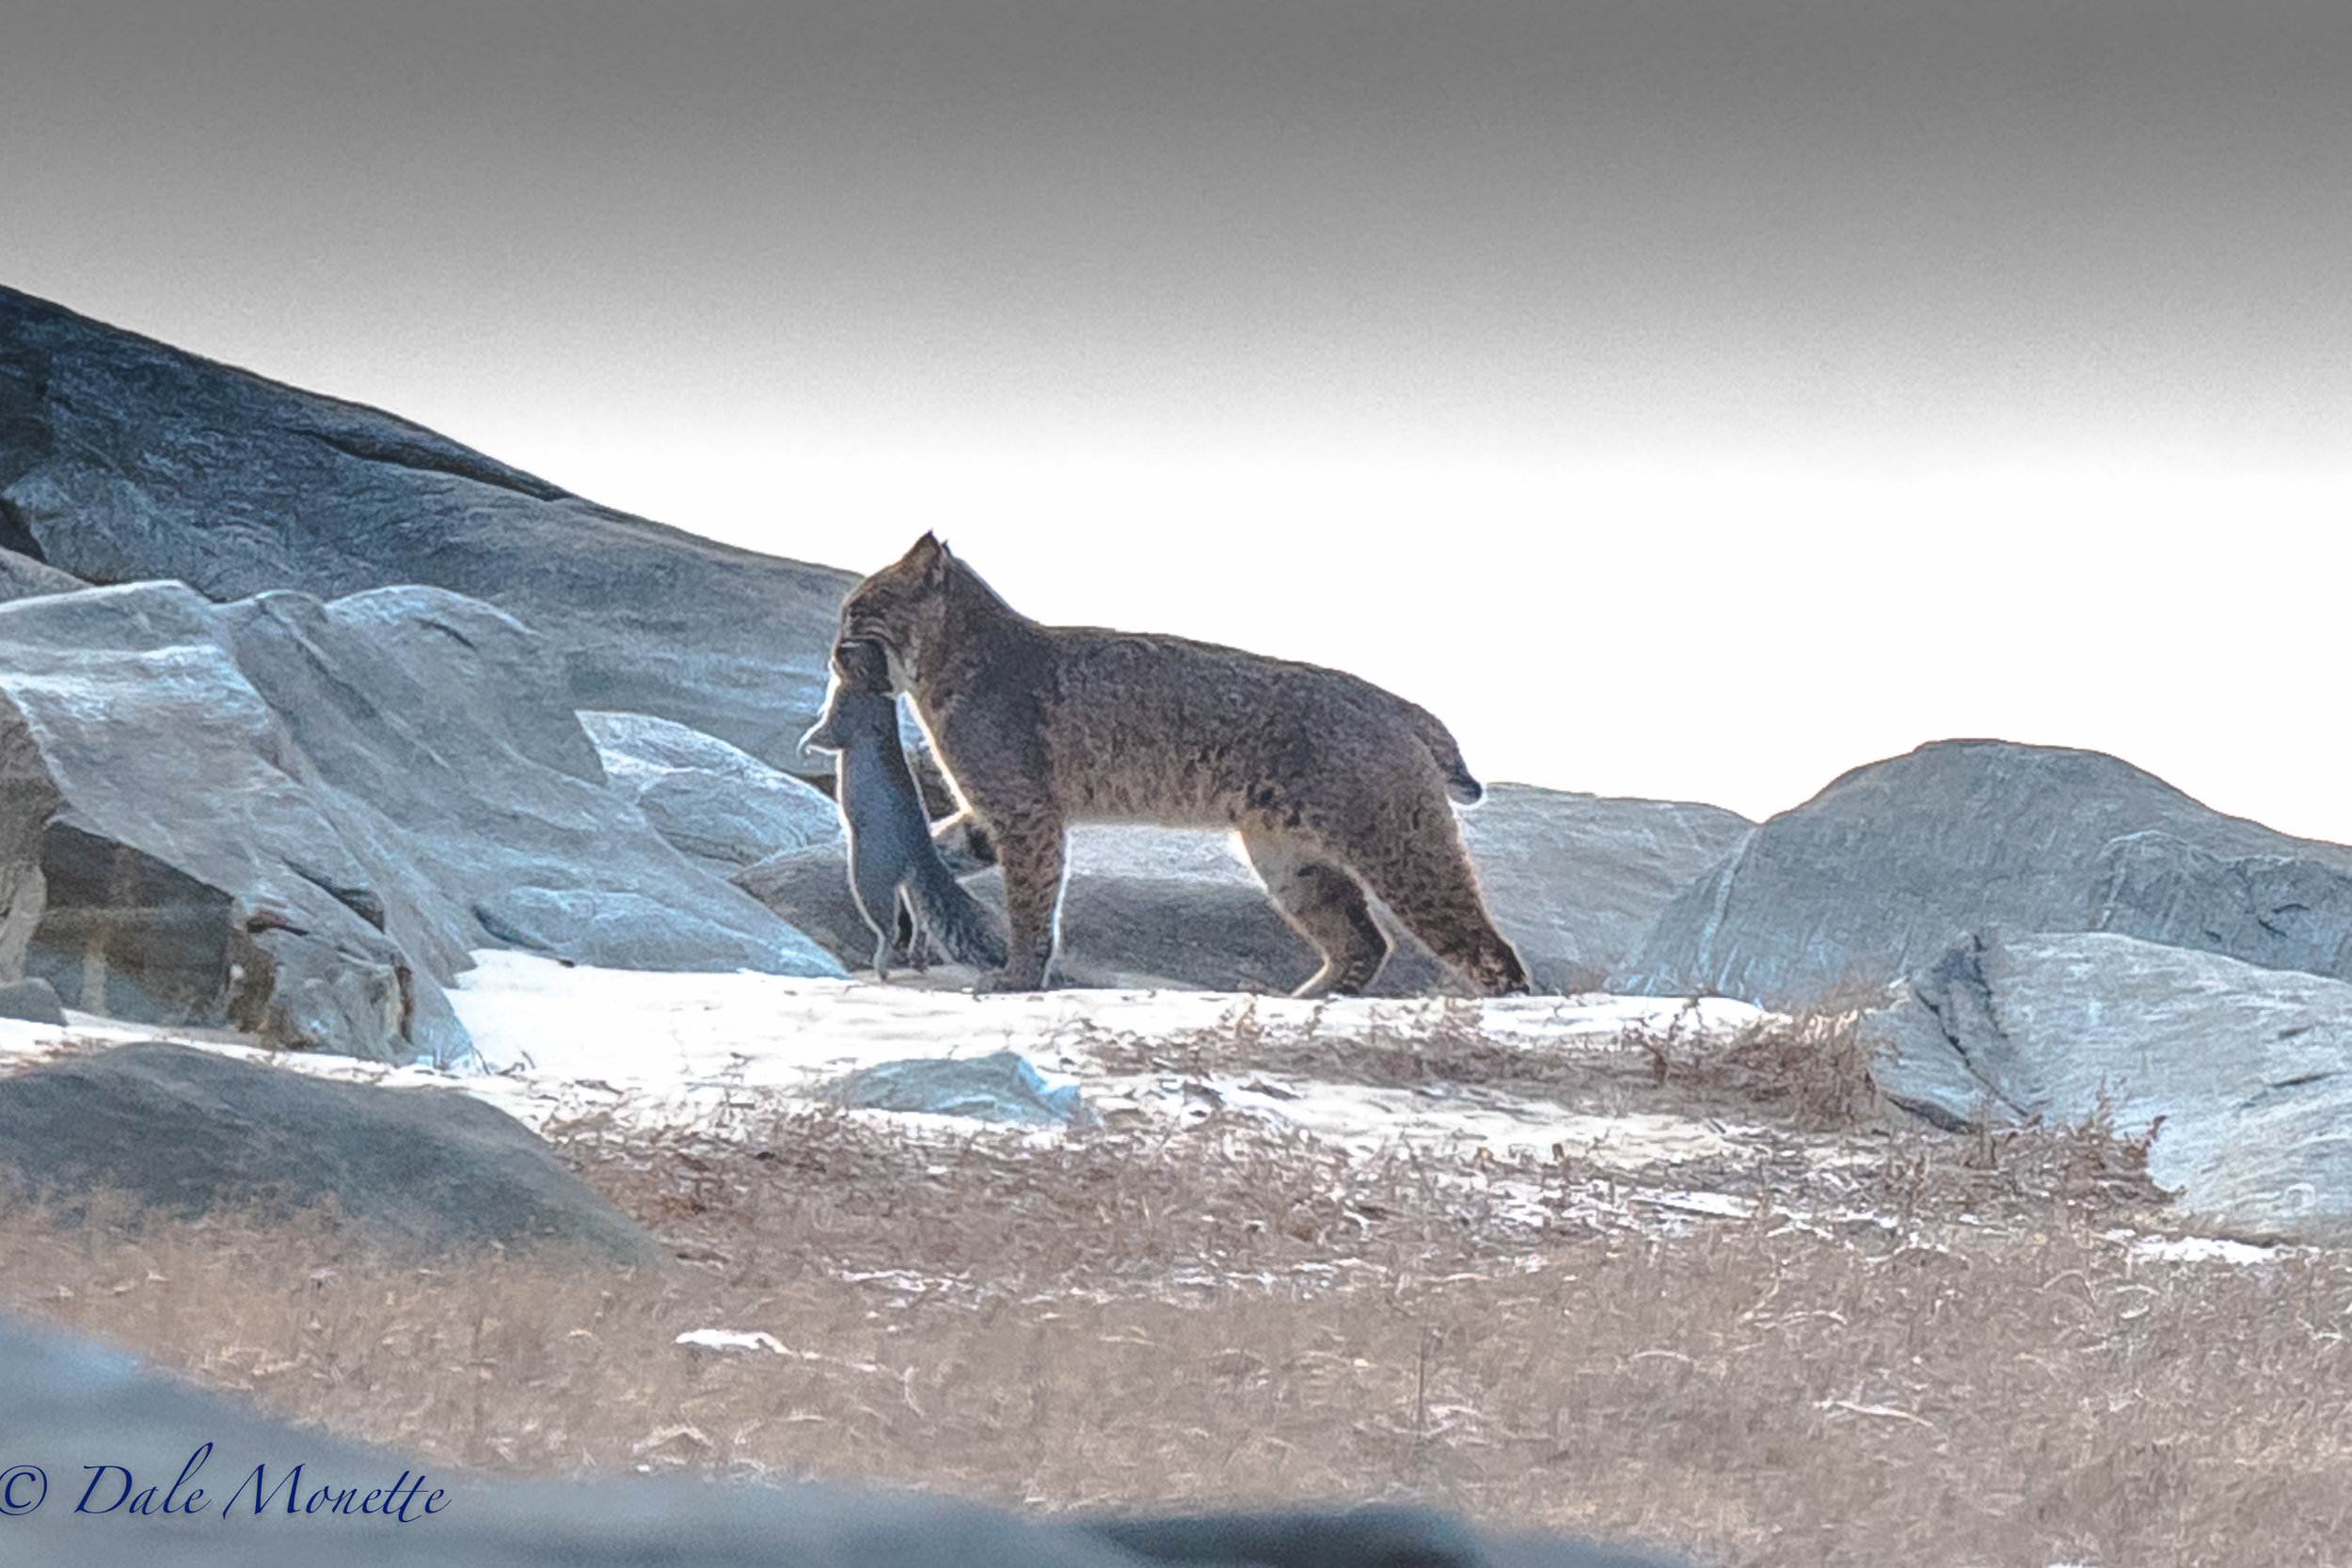   I hiked in to the northern Quabbin in 6 degree F weather this morning, set up hiding in the woods, and BINGO ! &nbsp;Withei 45 minutes this bobcat walked out about 100 yards south of me with a squirrel for breakfast !! &nbsp;12/11/16  